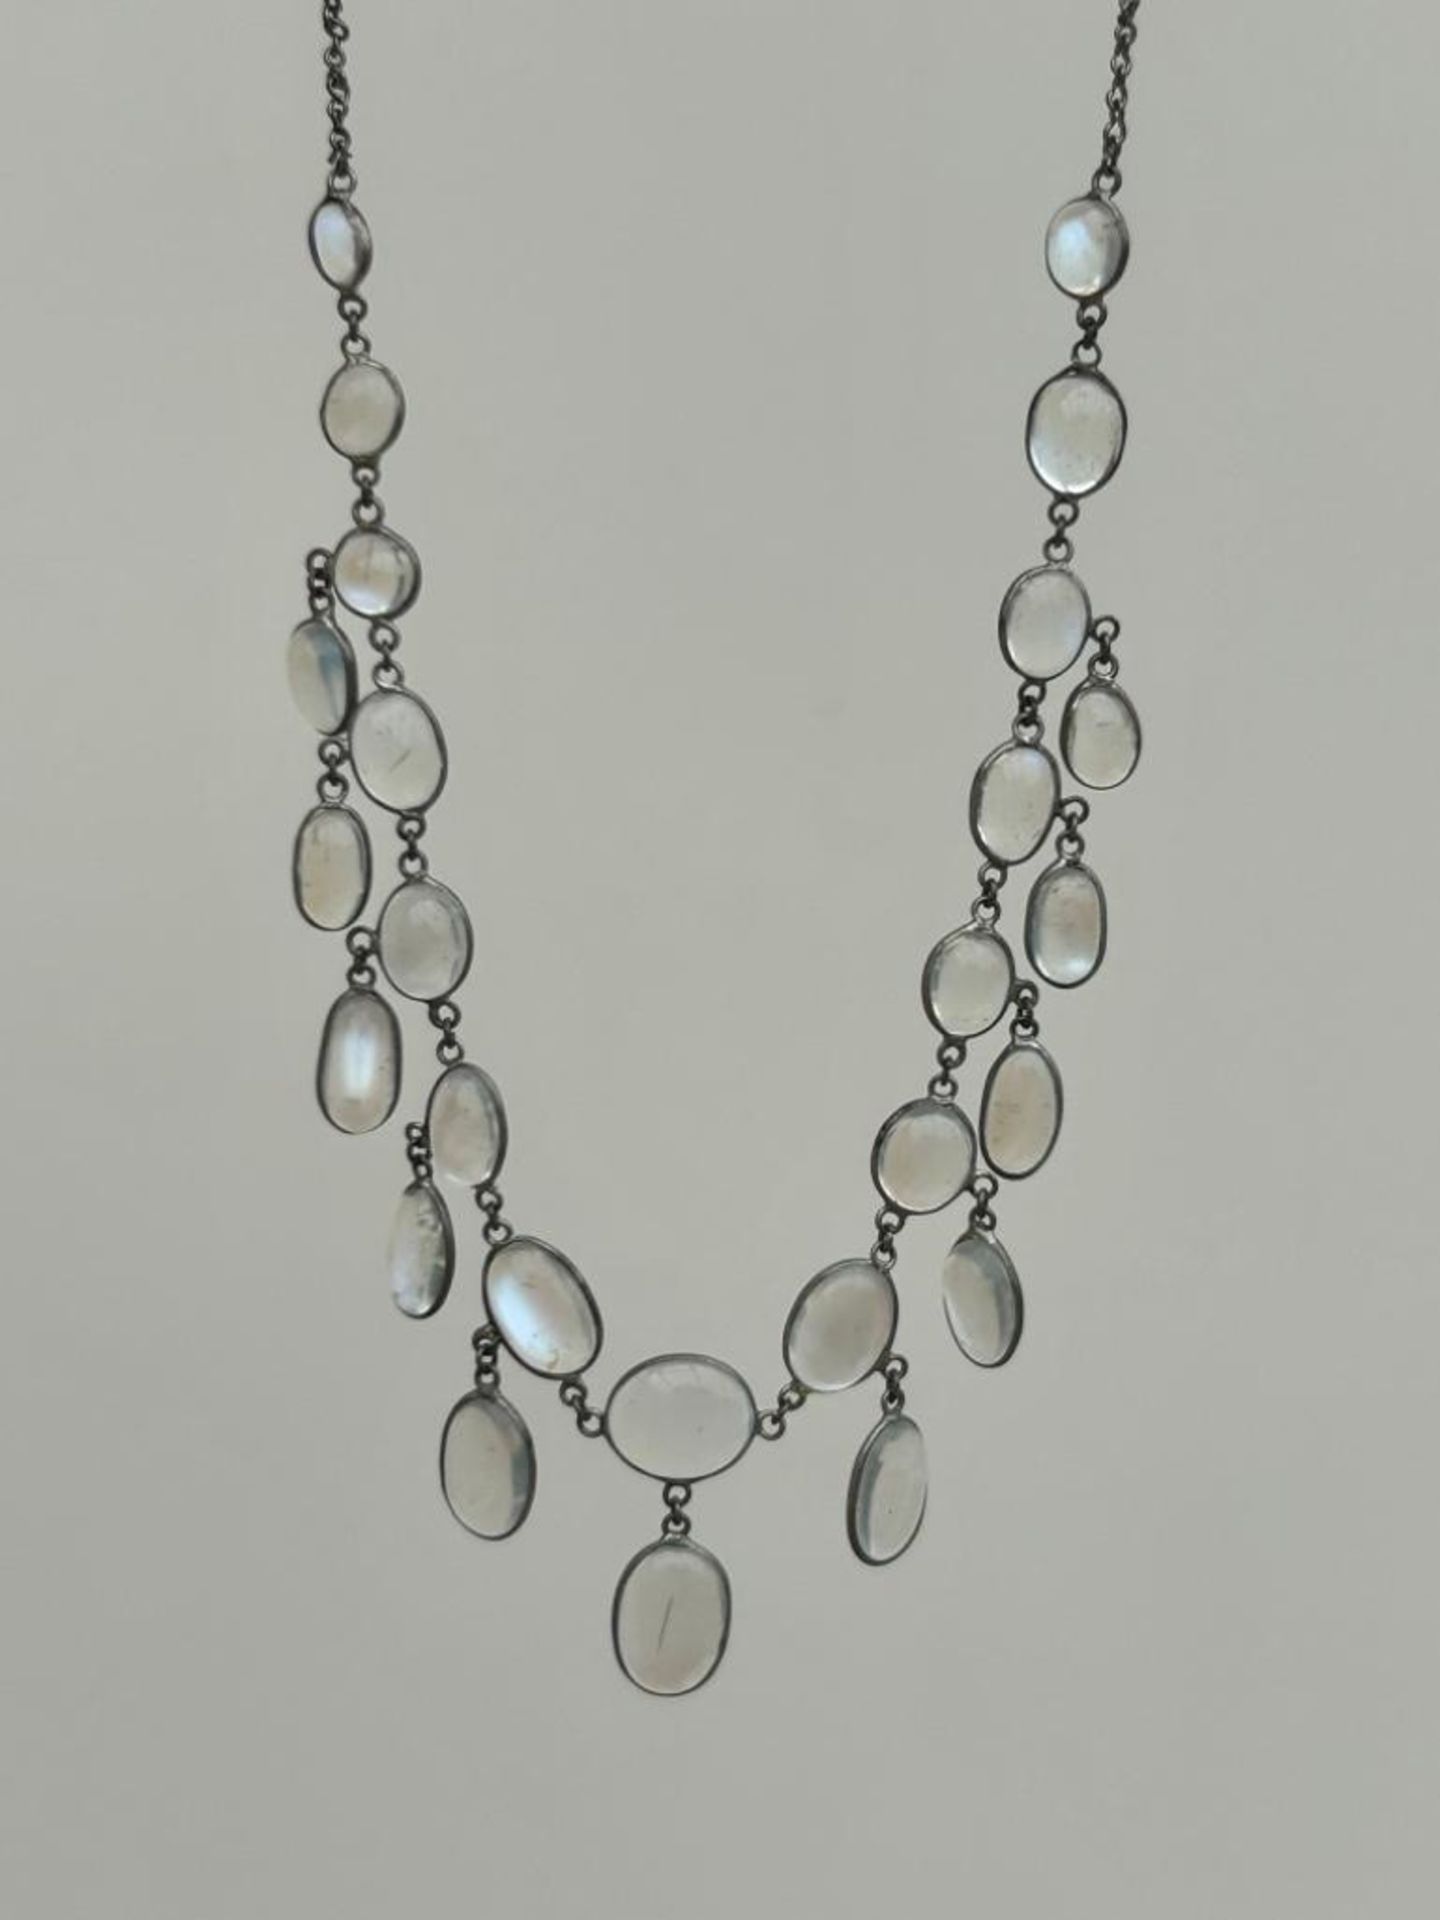 Antique Silver Moonstone Necklace - Image 3 of 7